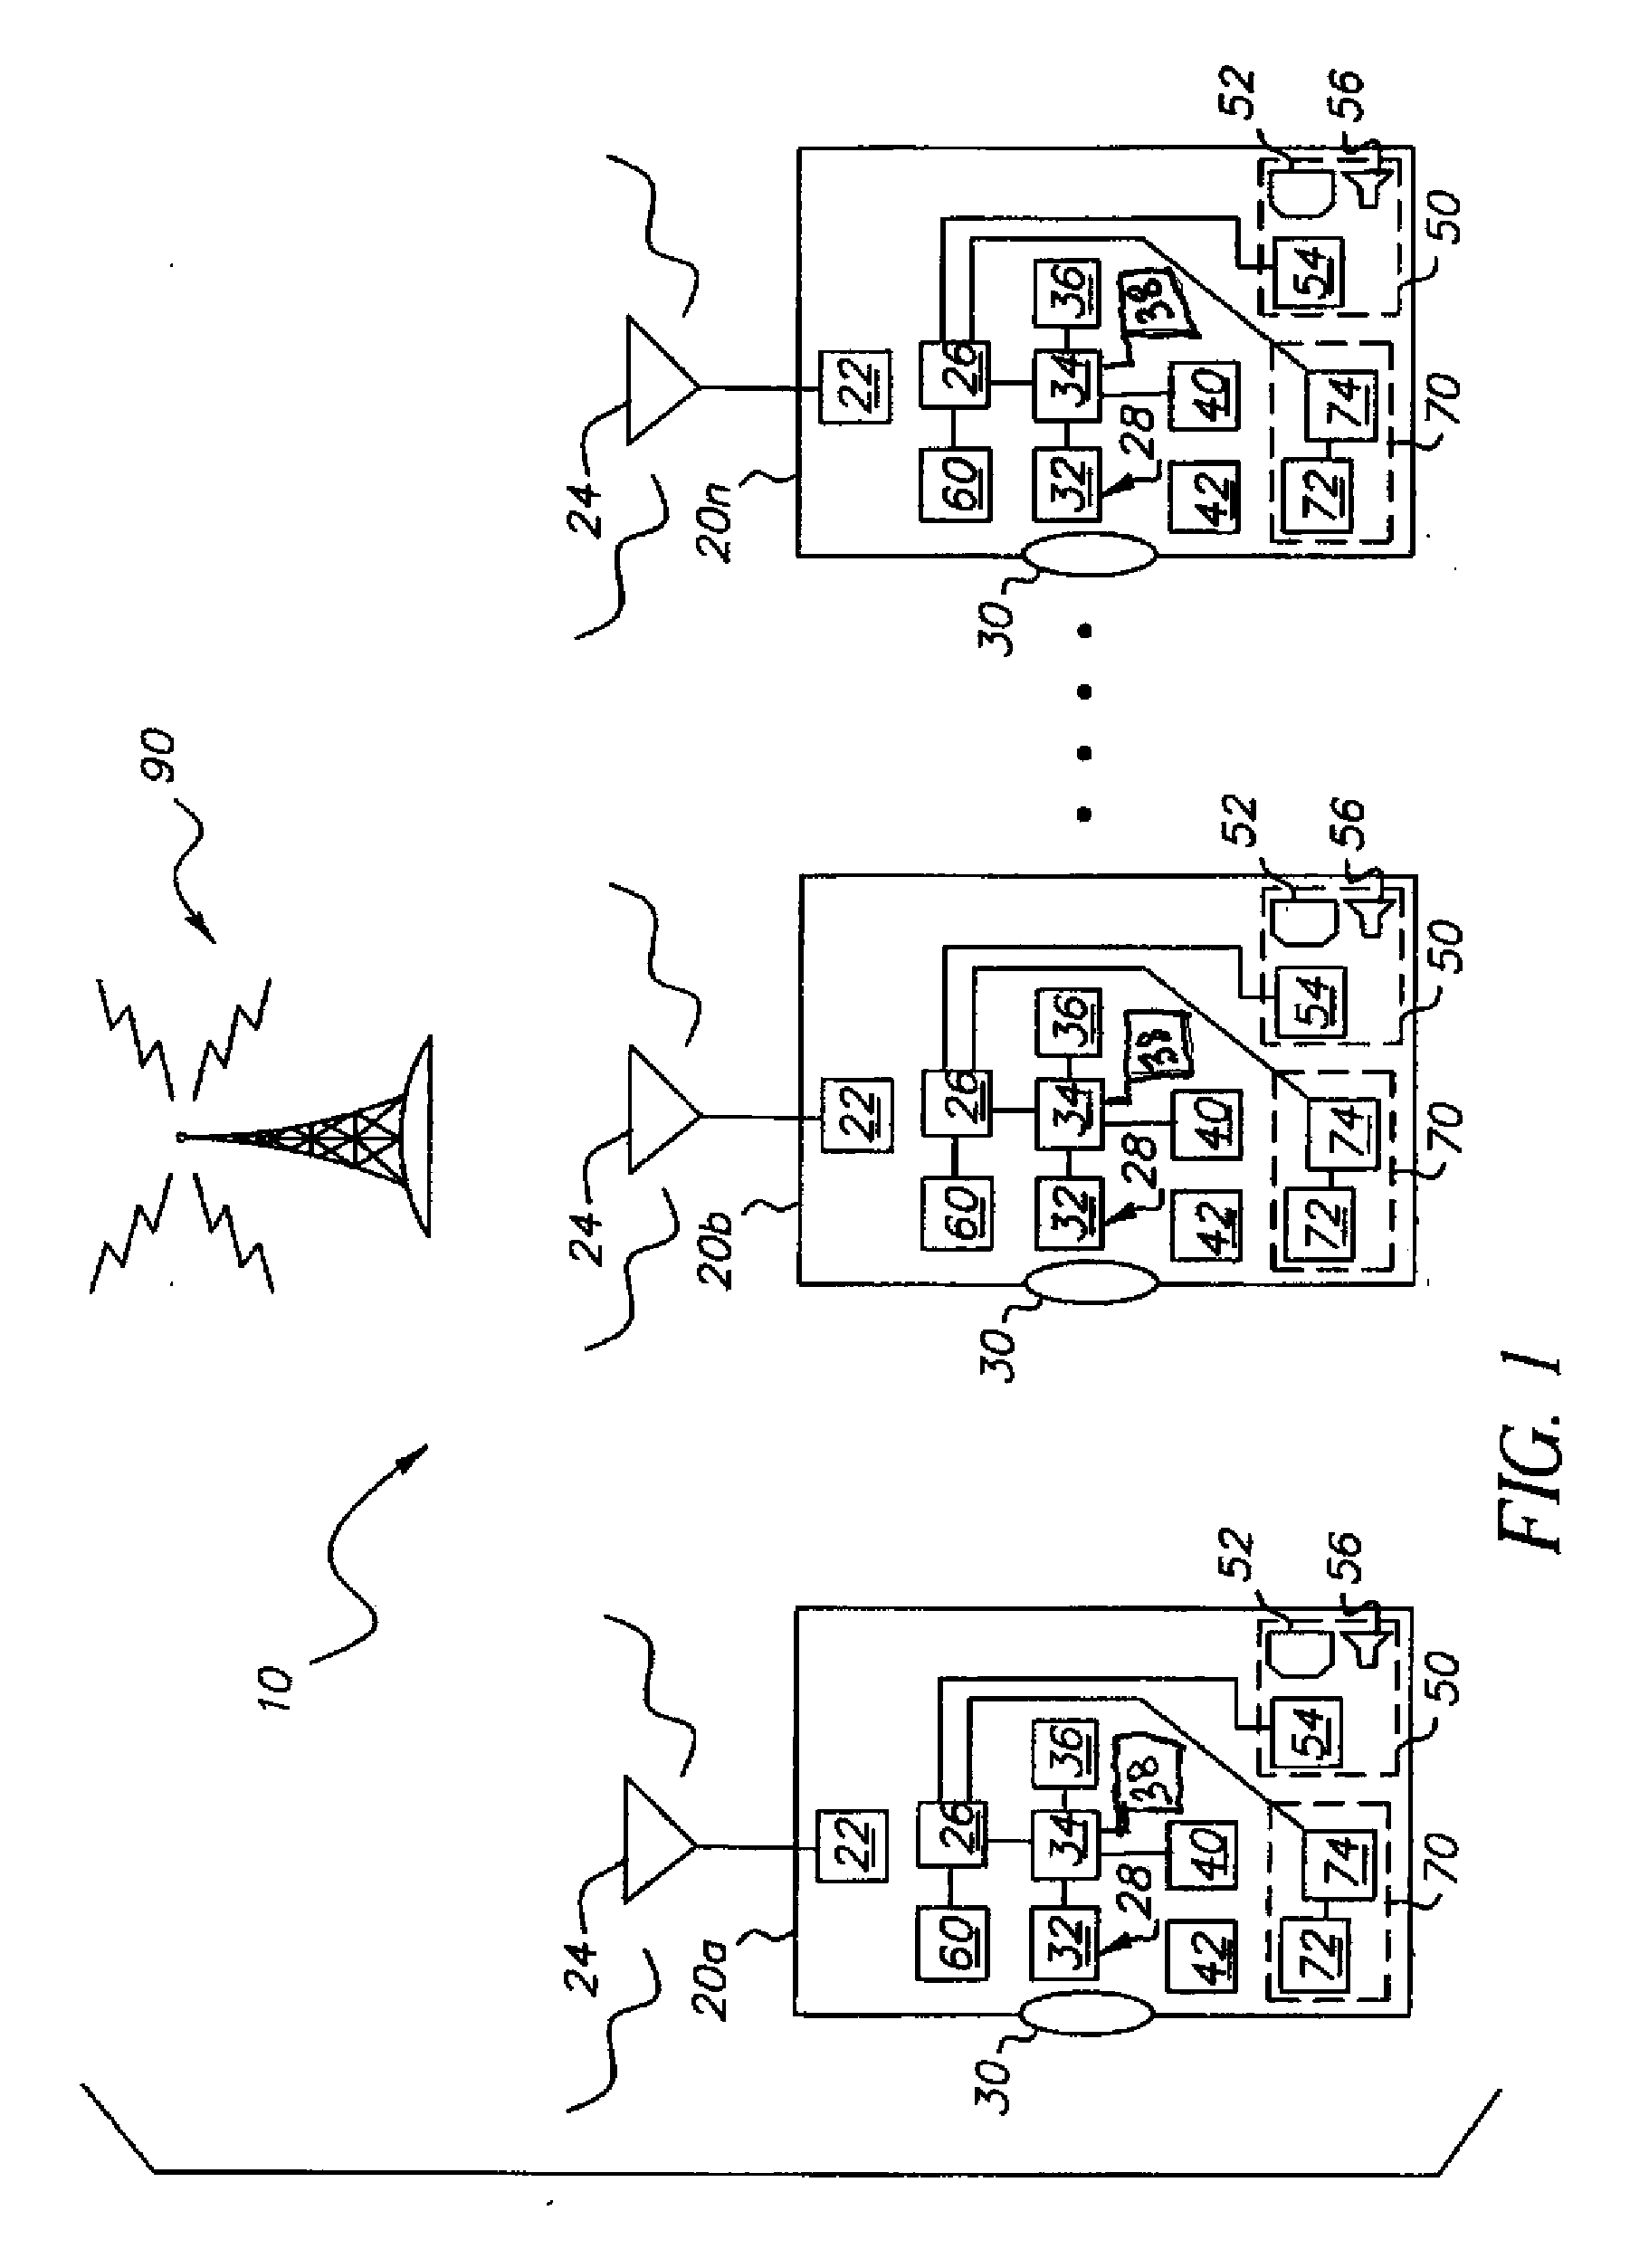 Image storage system, device and method